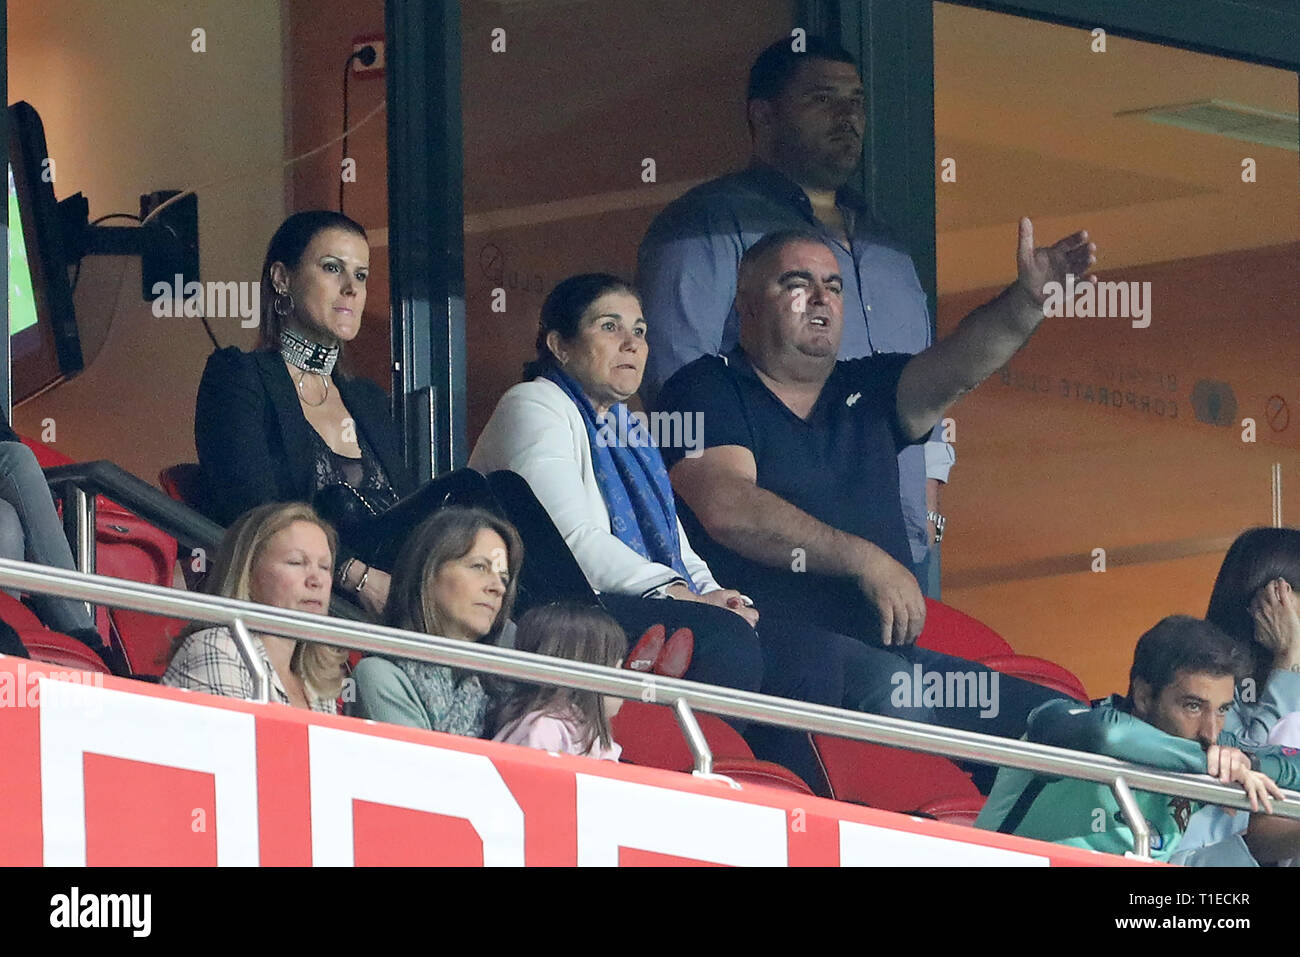 Elma Aveiro (sister of Cristiano Ronaldo), Dolores Aveiro (mother of Cristiano Ronaldo) and José Andrade (stepfather of Cristiano Ronaldo), Cristiano Ronaldo's family watch the game during the Qualifiers - Group B to Euro 2020 football match between Portugal vs Serbia. (Final score: Portugal 1 - 1 Serbia) Stock Photo